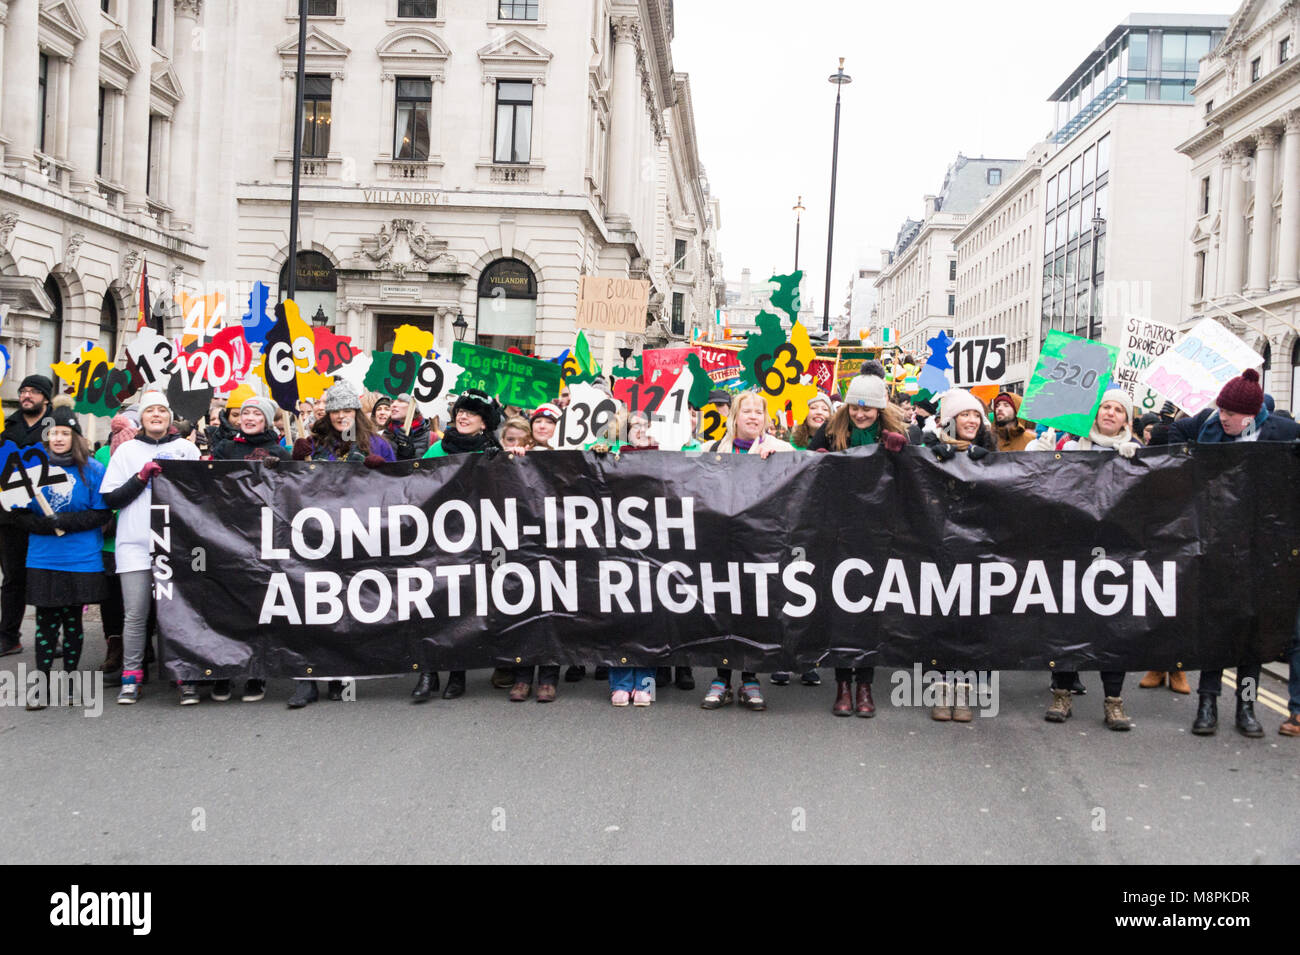 London, UK. 18th March, 2018. London Irish abortion rights campaigners take part in the parade Credit: Raymond Tang/Alamy Live News Stock Photo